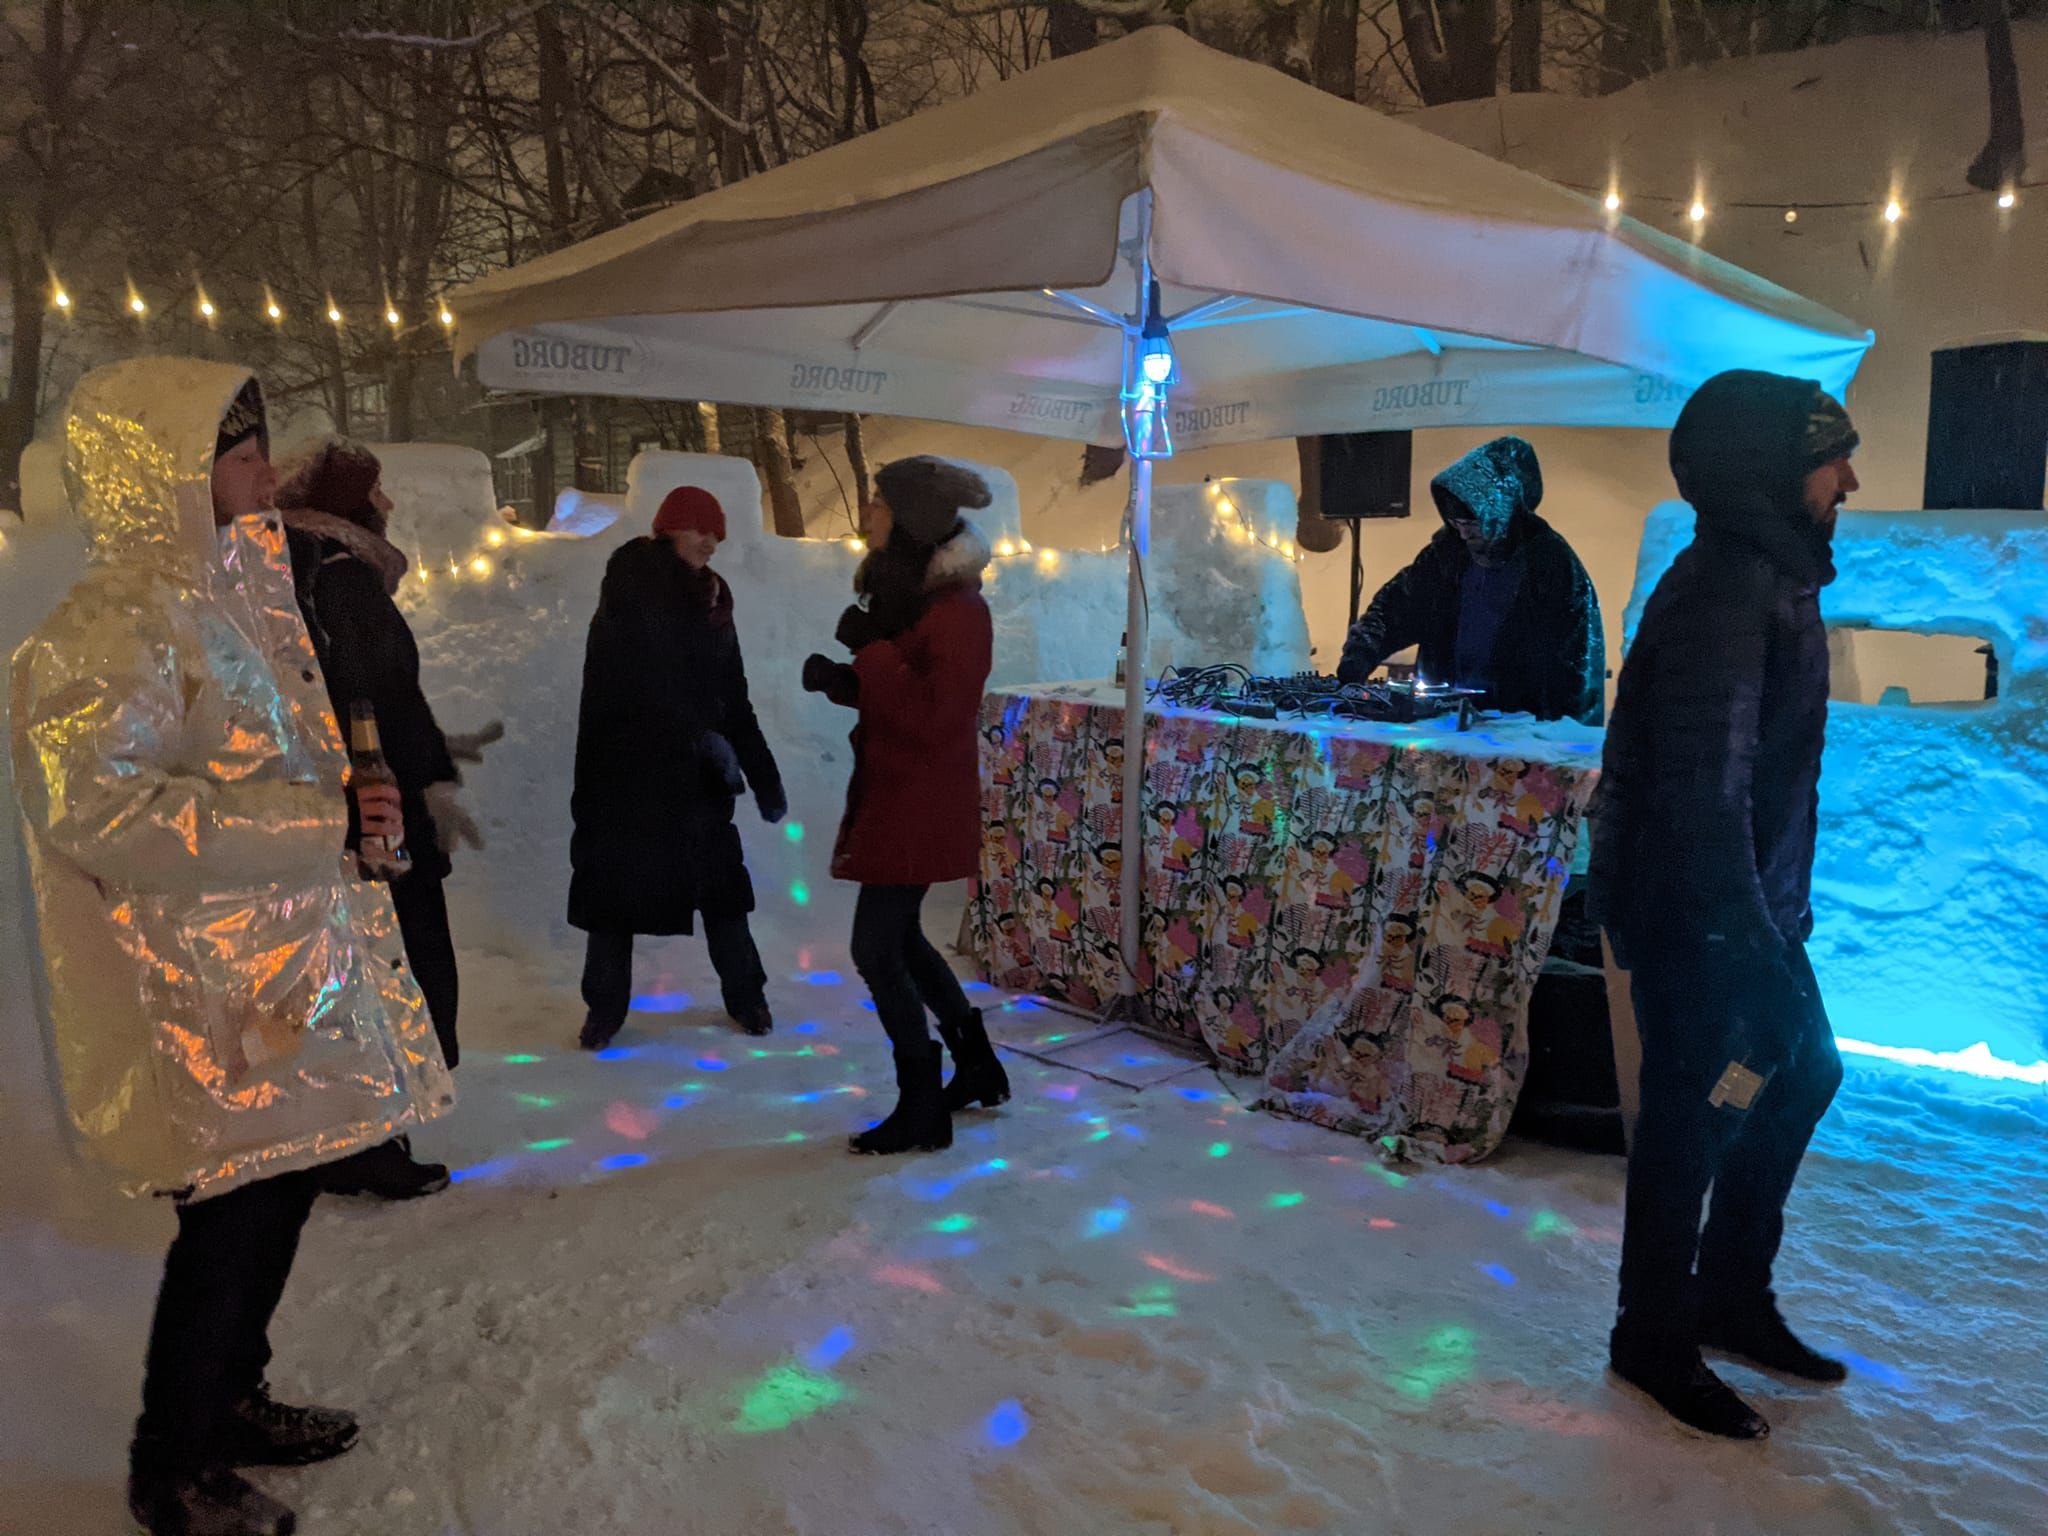 DJ Kaspu at one of his recent gigs at ULA, who hosts Snow Bar events annually in below-zero temperatures.